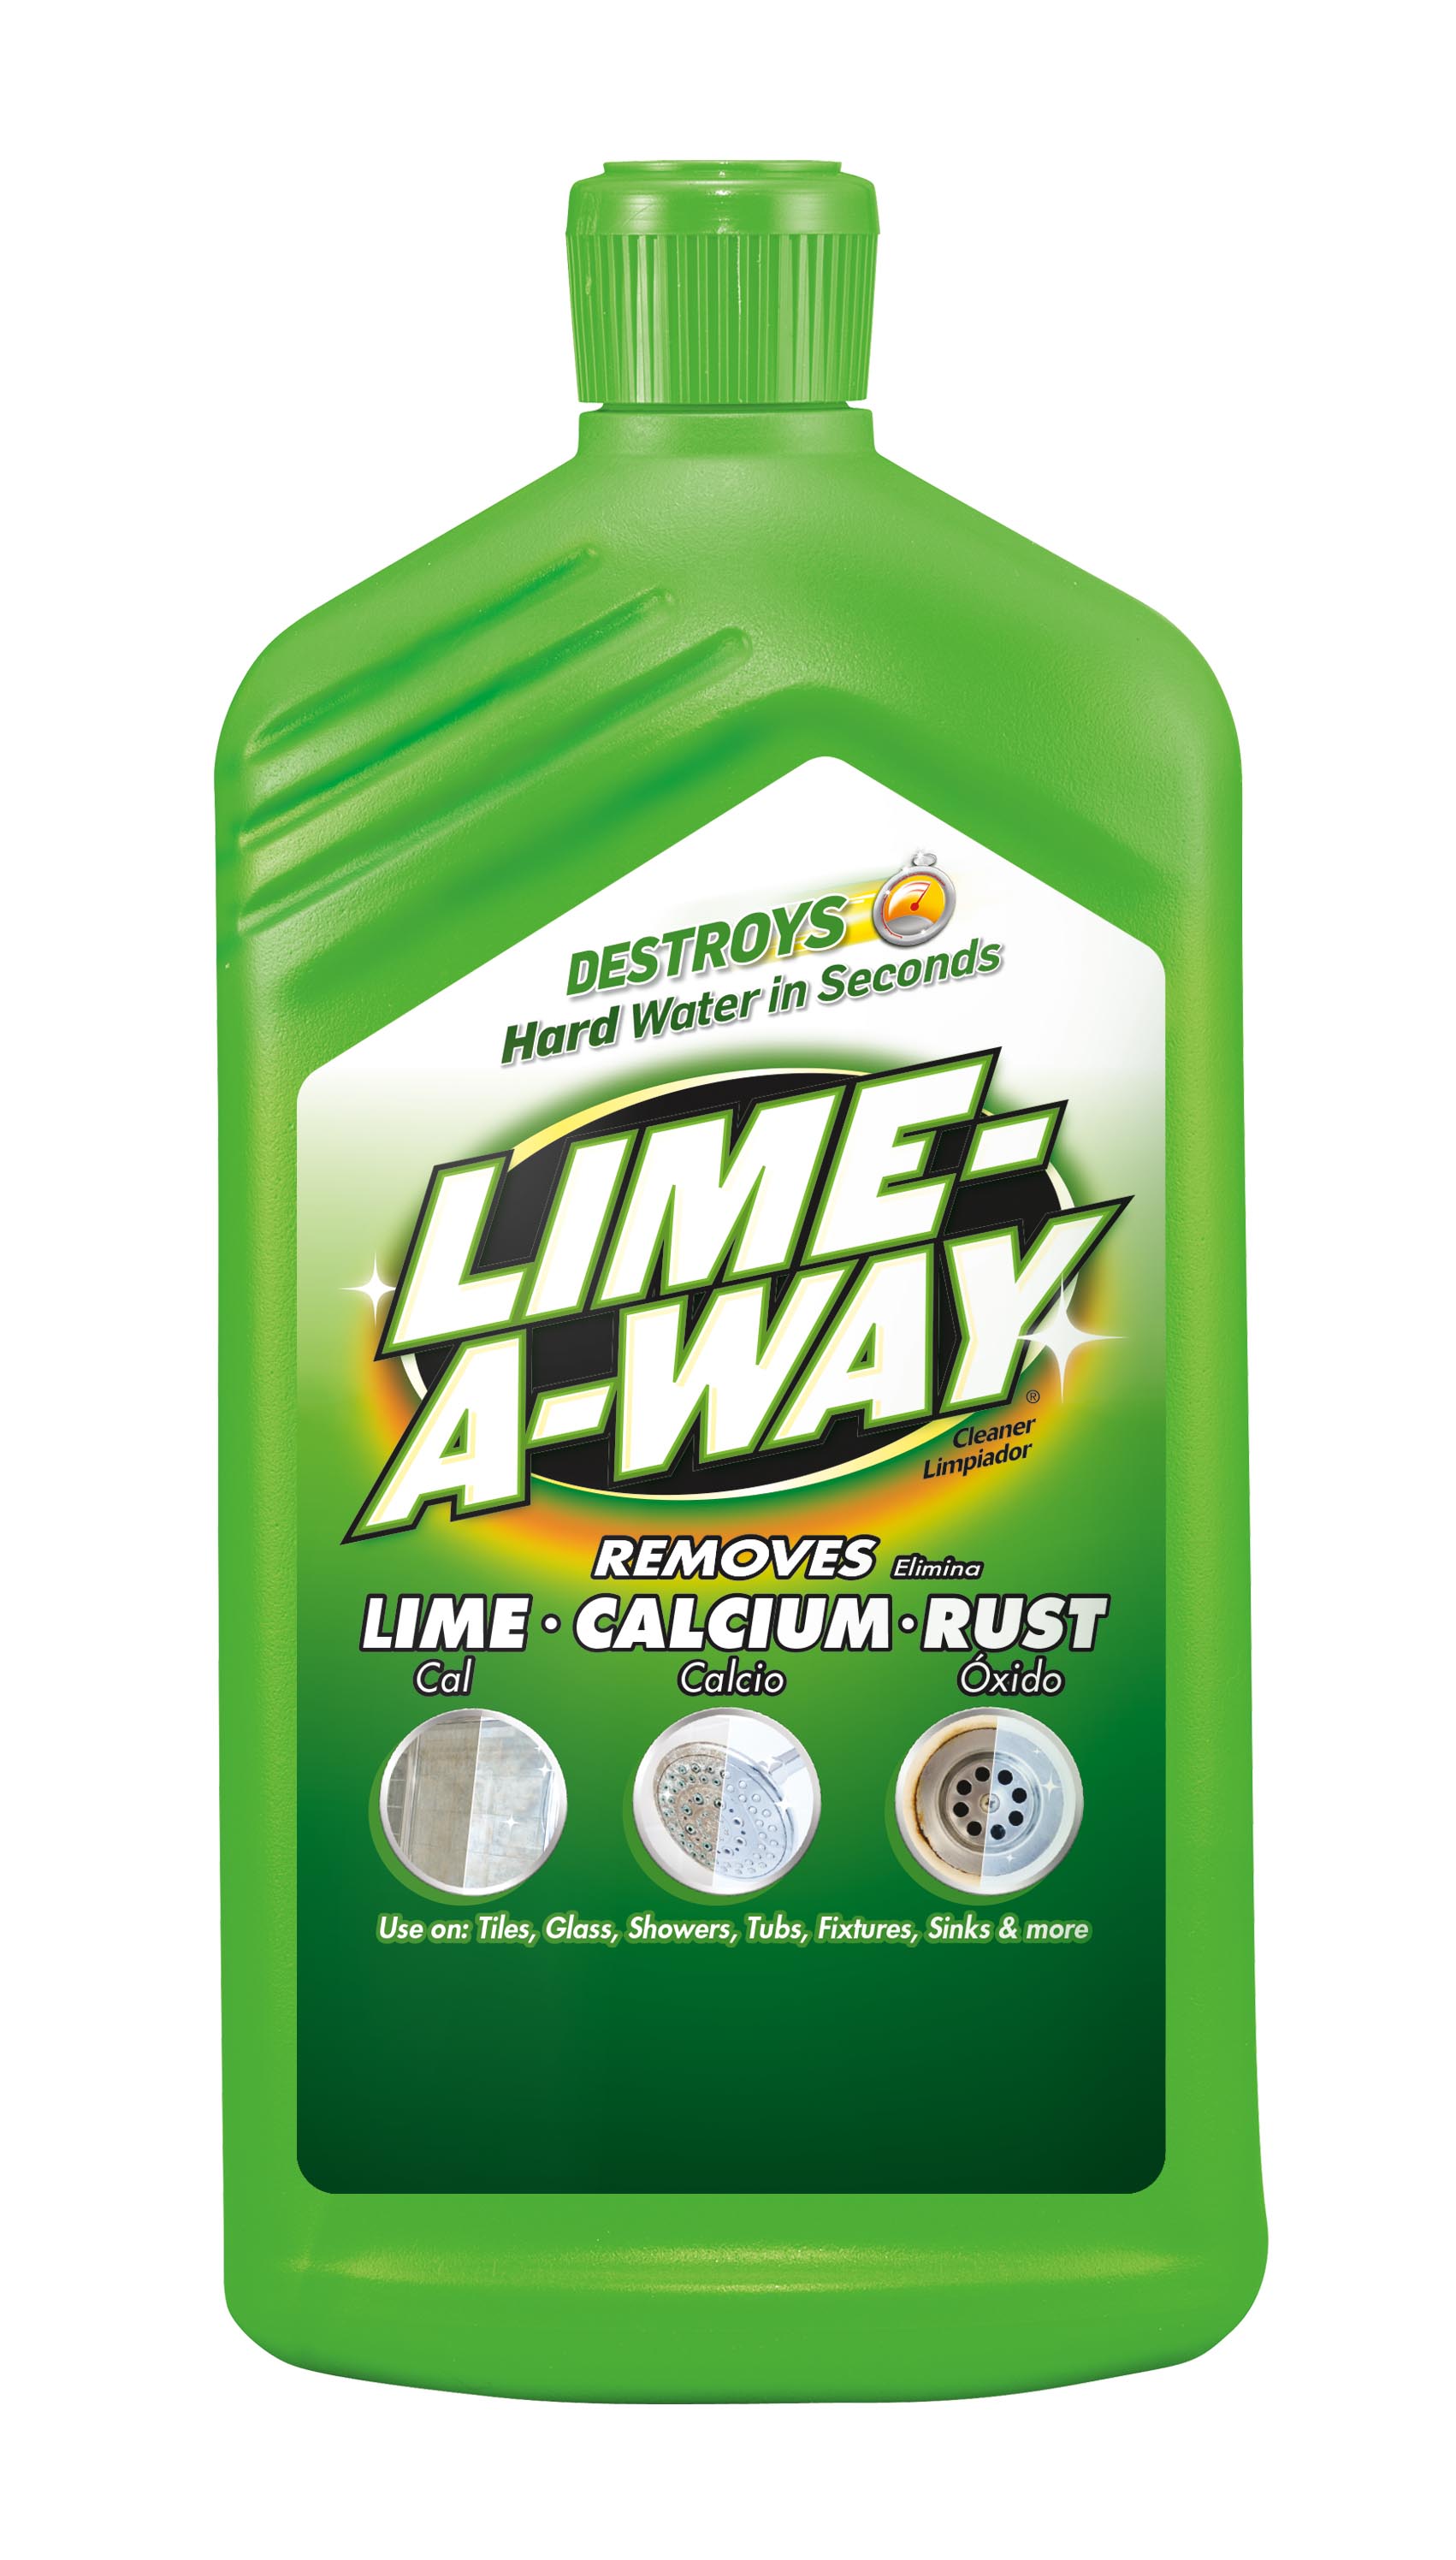 LIME-A-WAY® Cleaner - Toggle (Discontinued November 2022)